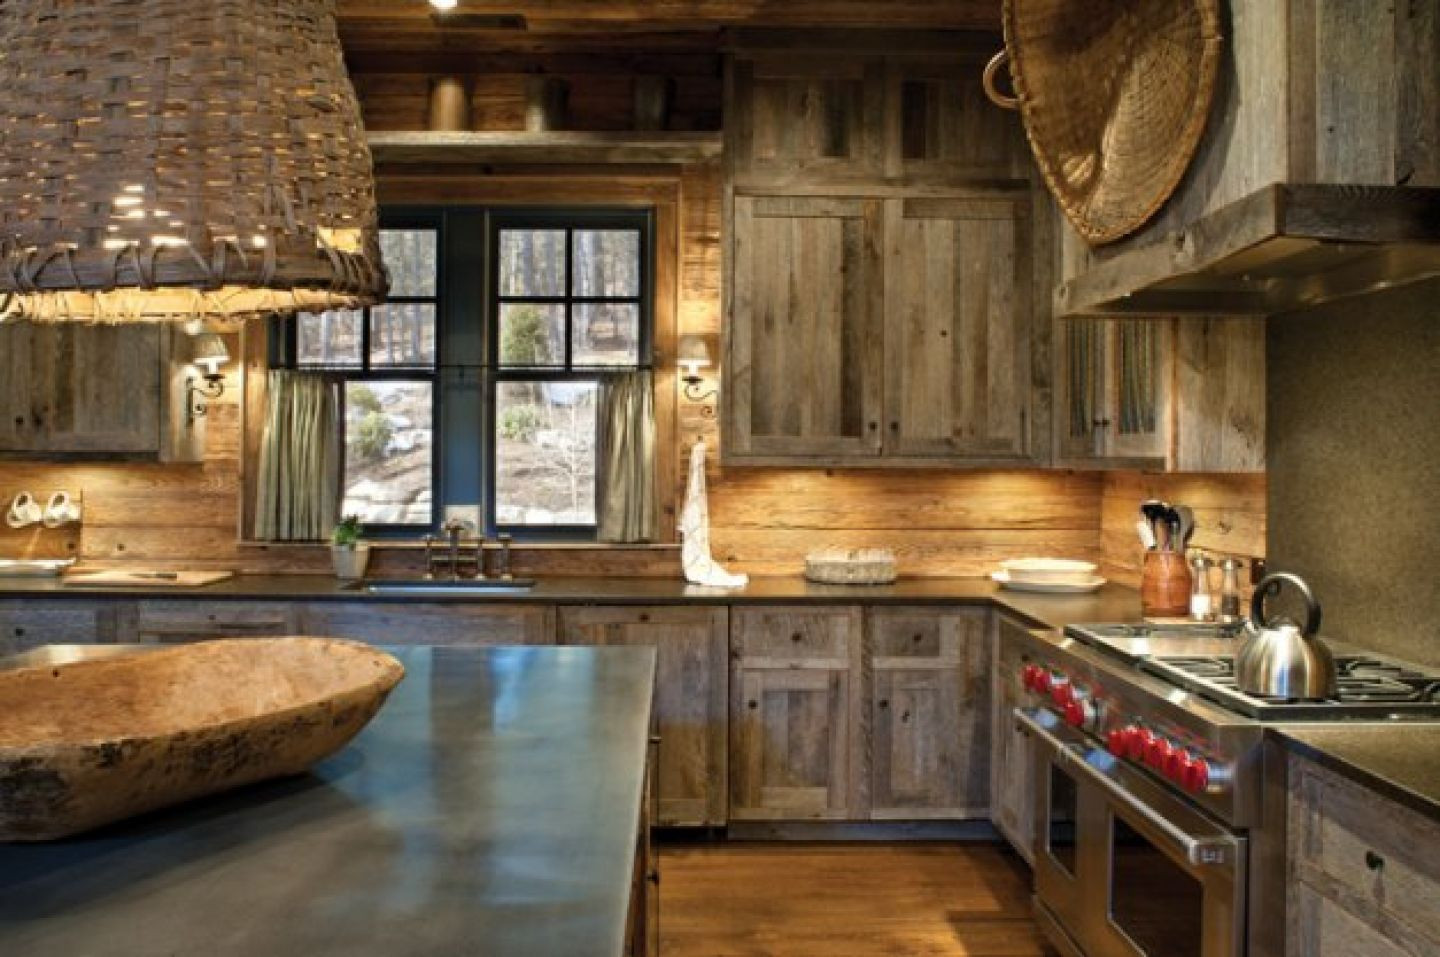 Rustic Kitchen Cabinet Ideas
 Charming Rustic Kitchen Ideas and Inspirations Traba Homes